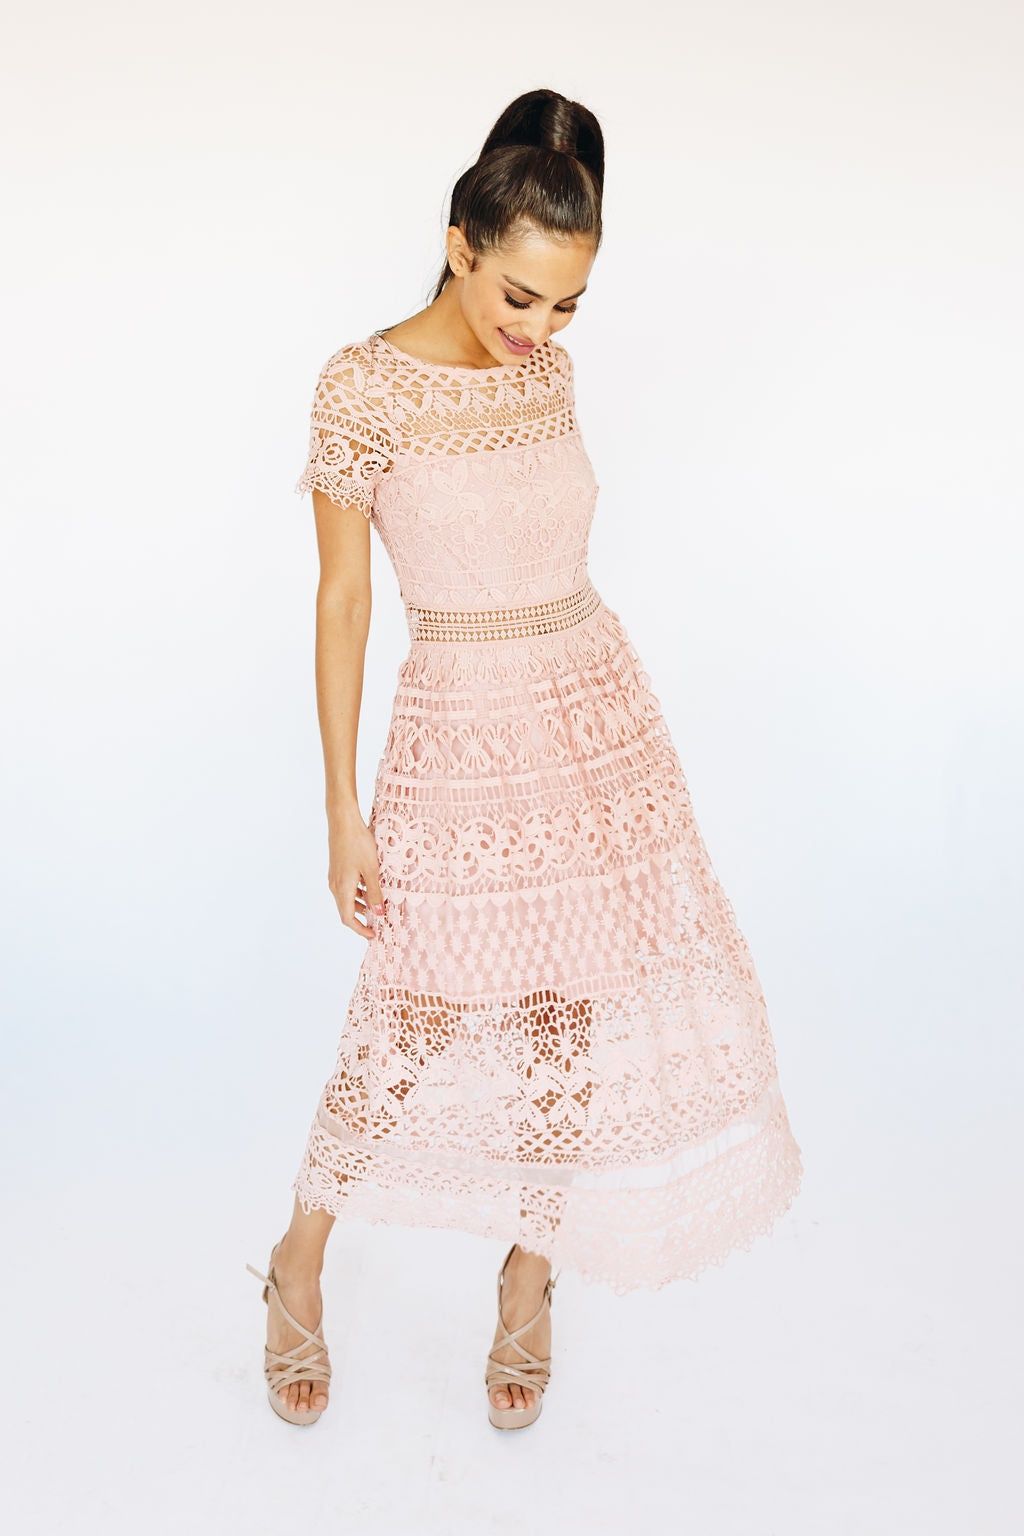 Style JMD7133-1 AURORA Just Me Size 4 Homecoming Cap Sleeve Lace Light Pink Cocktail Dress on Queenly